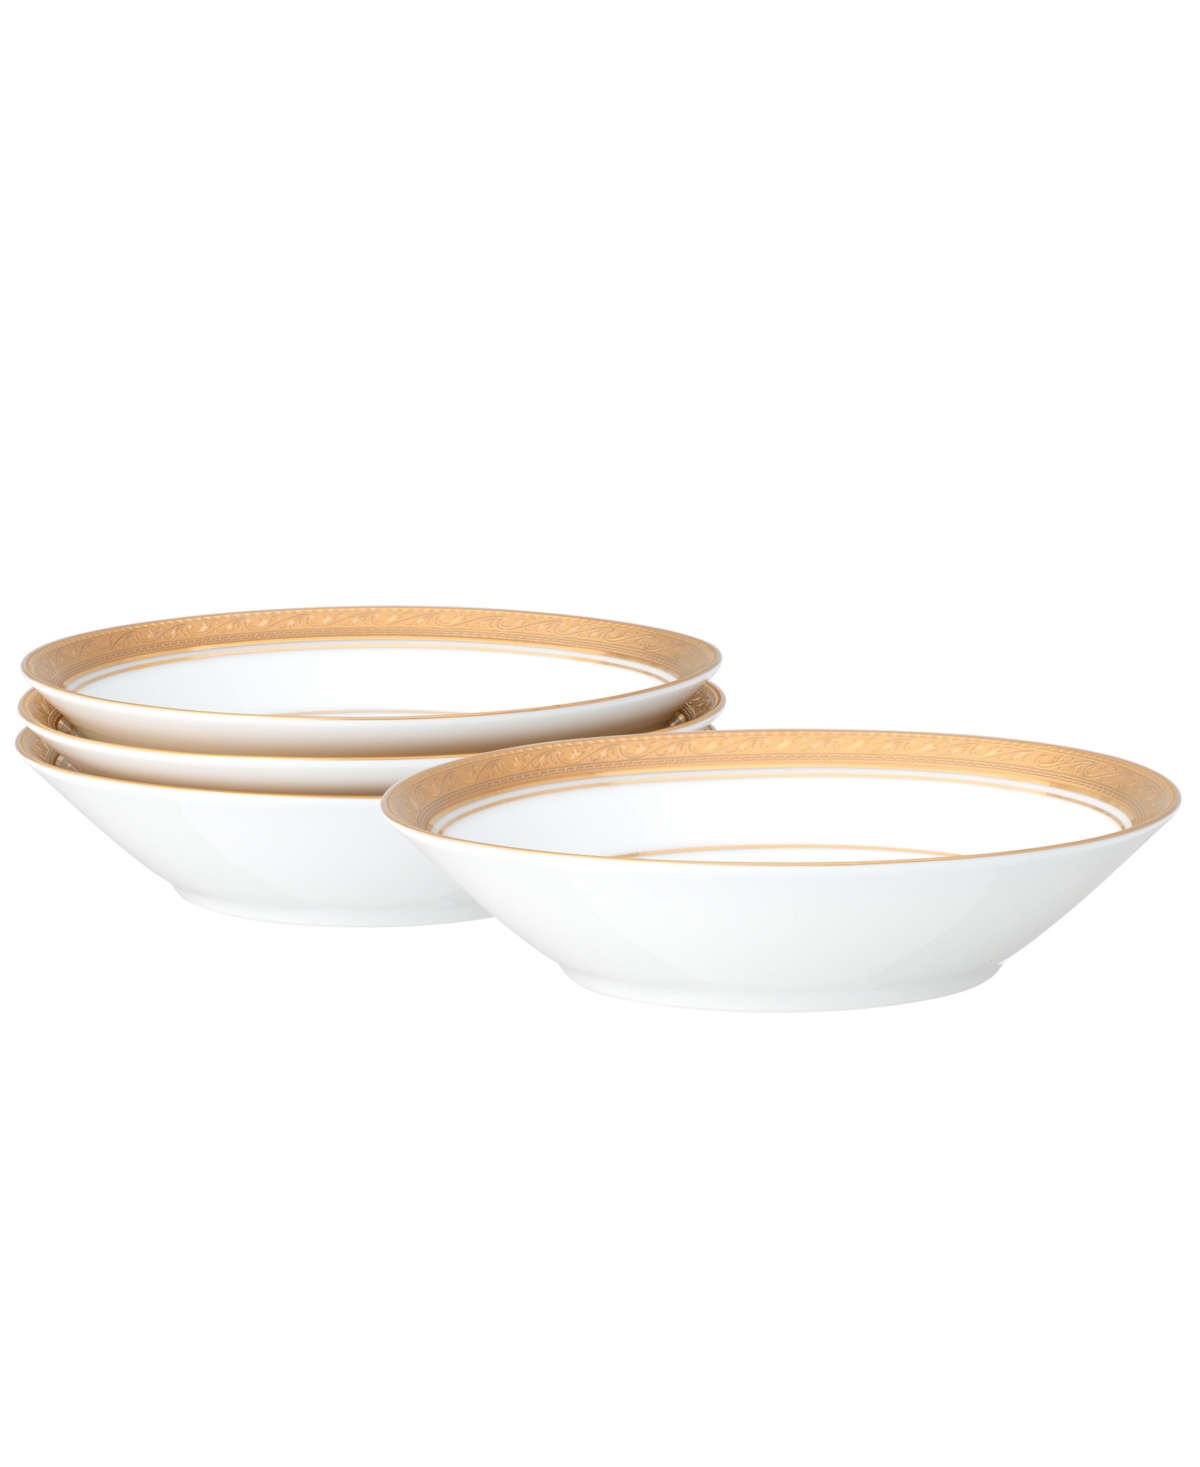 Noritake Crestwood Gold Set Of 4 Fruit Bowls, Service For 4 In White